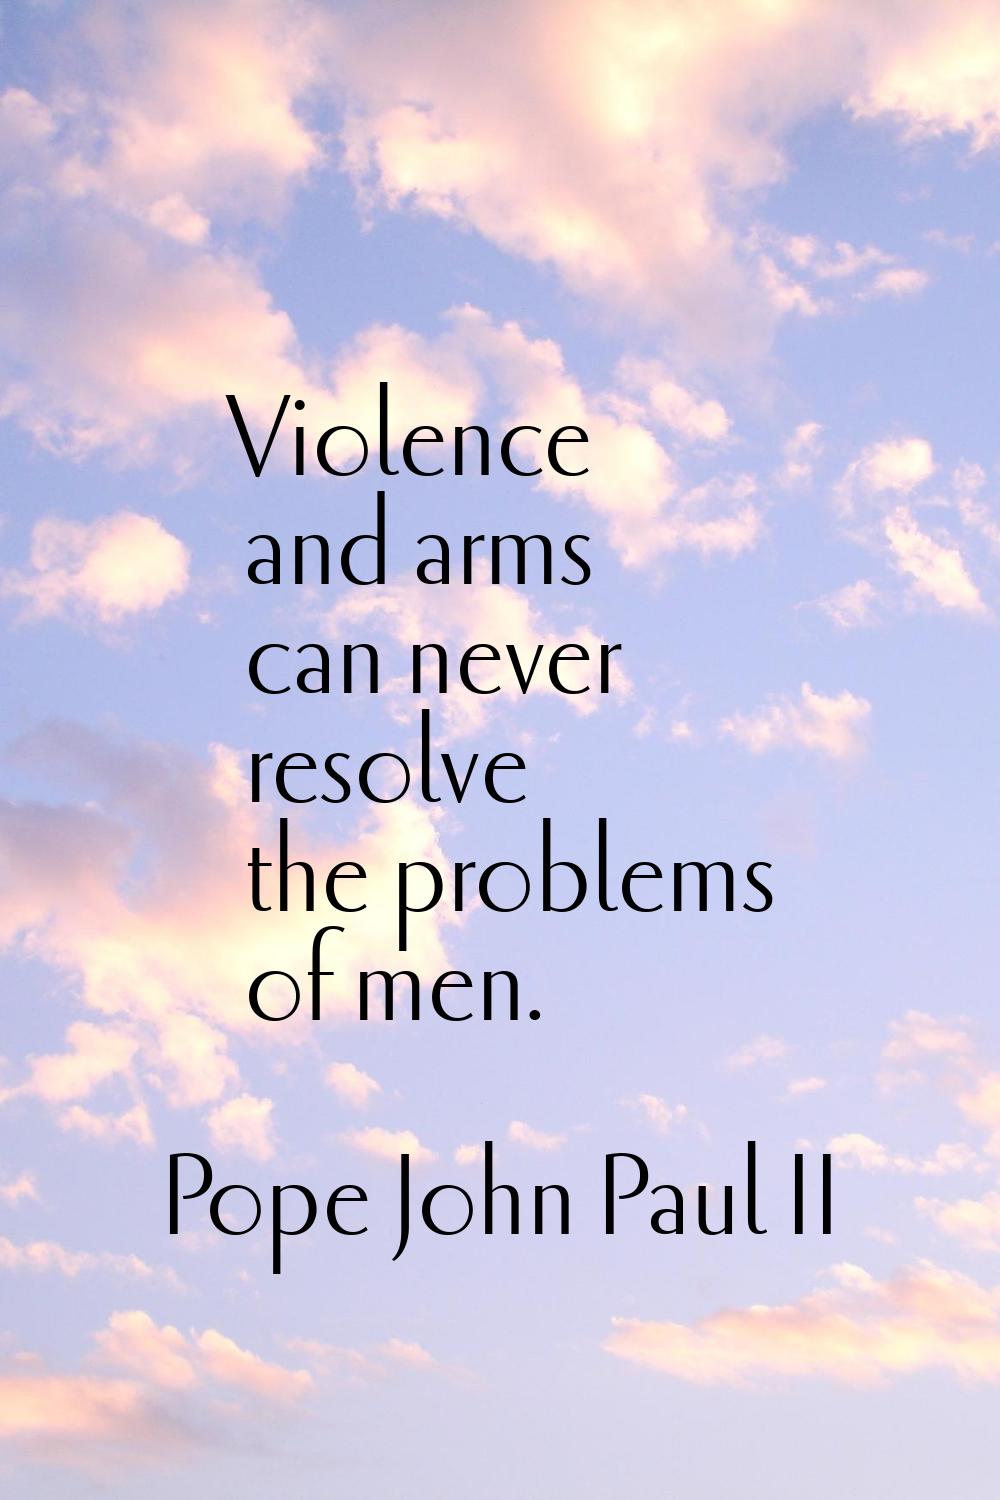 Violence and arms can never resolve the problems of men.